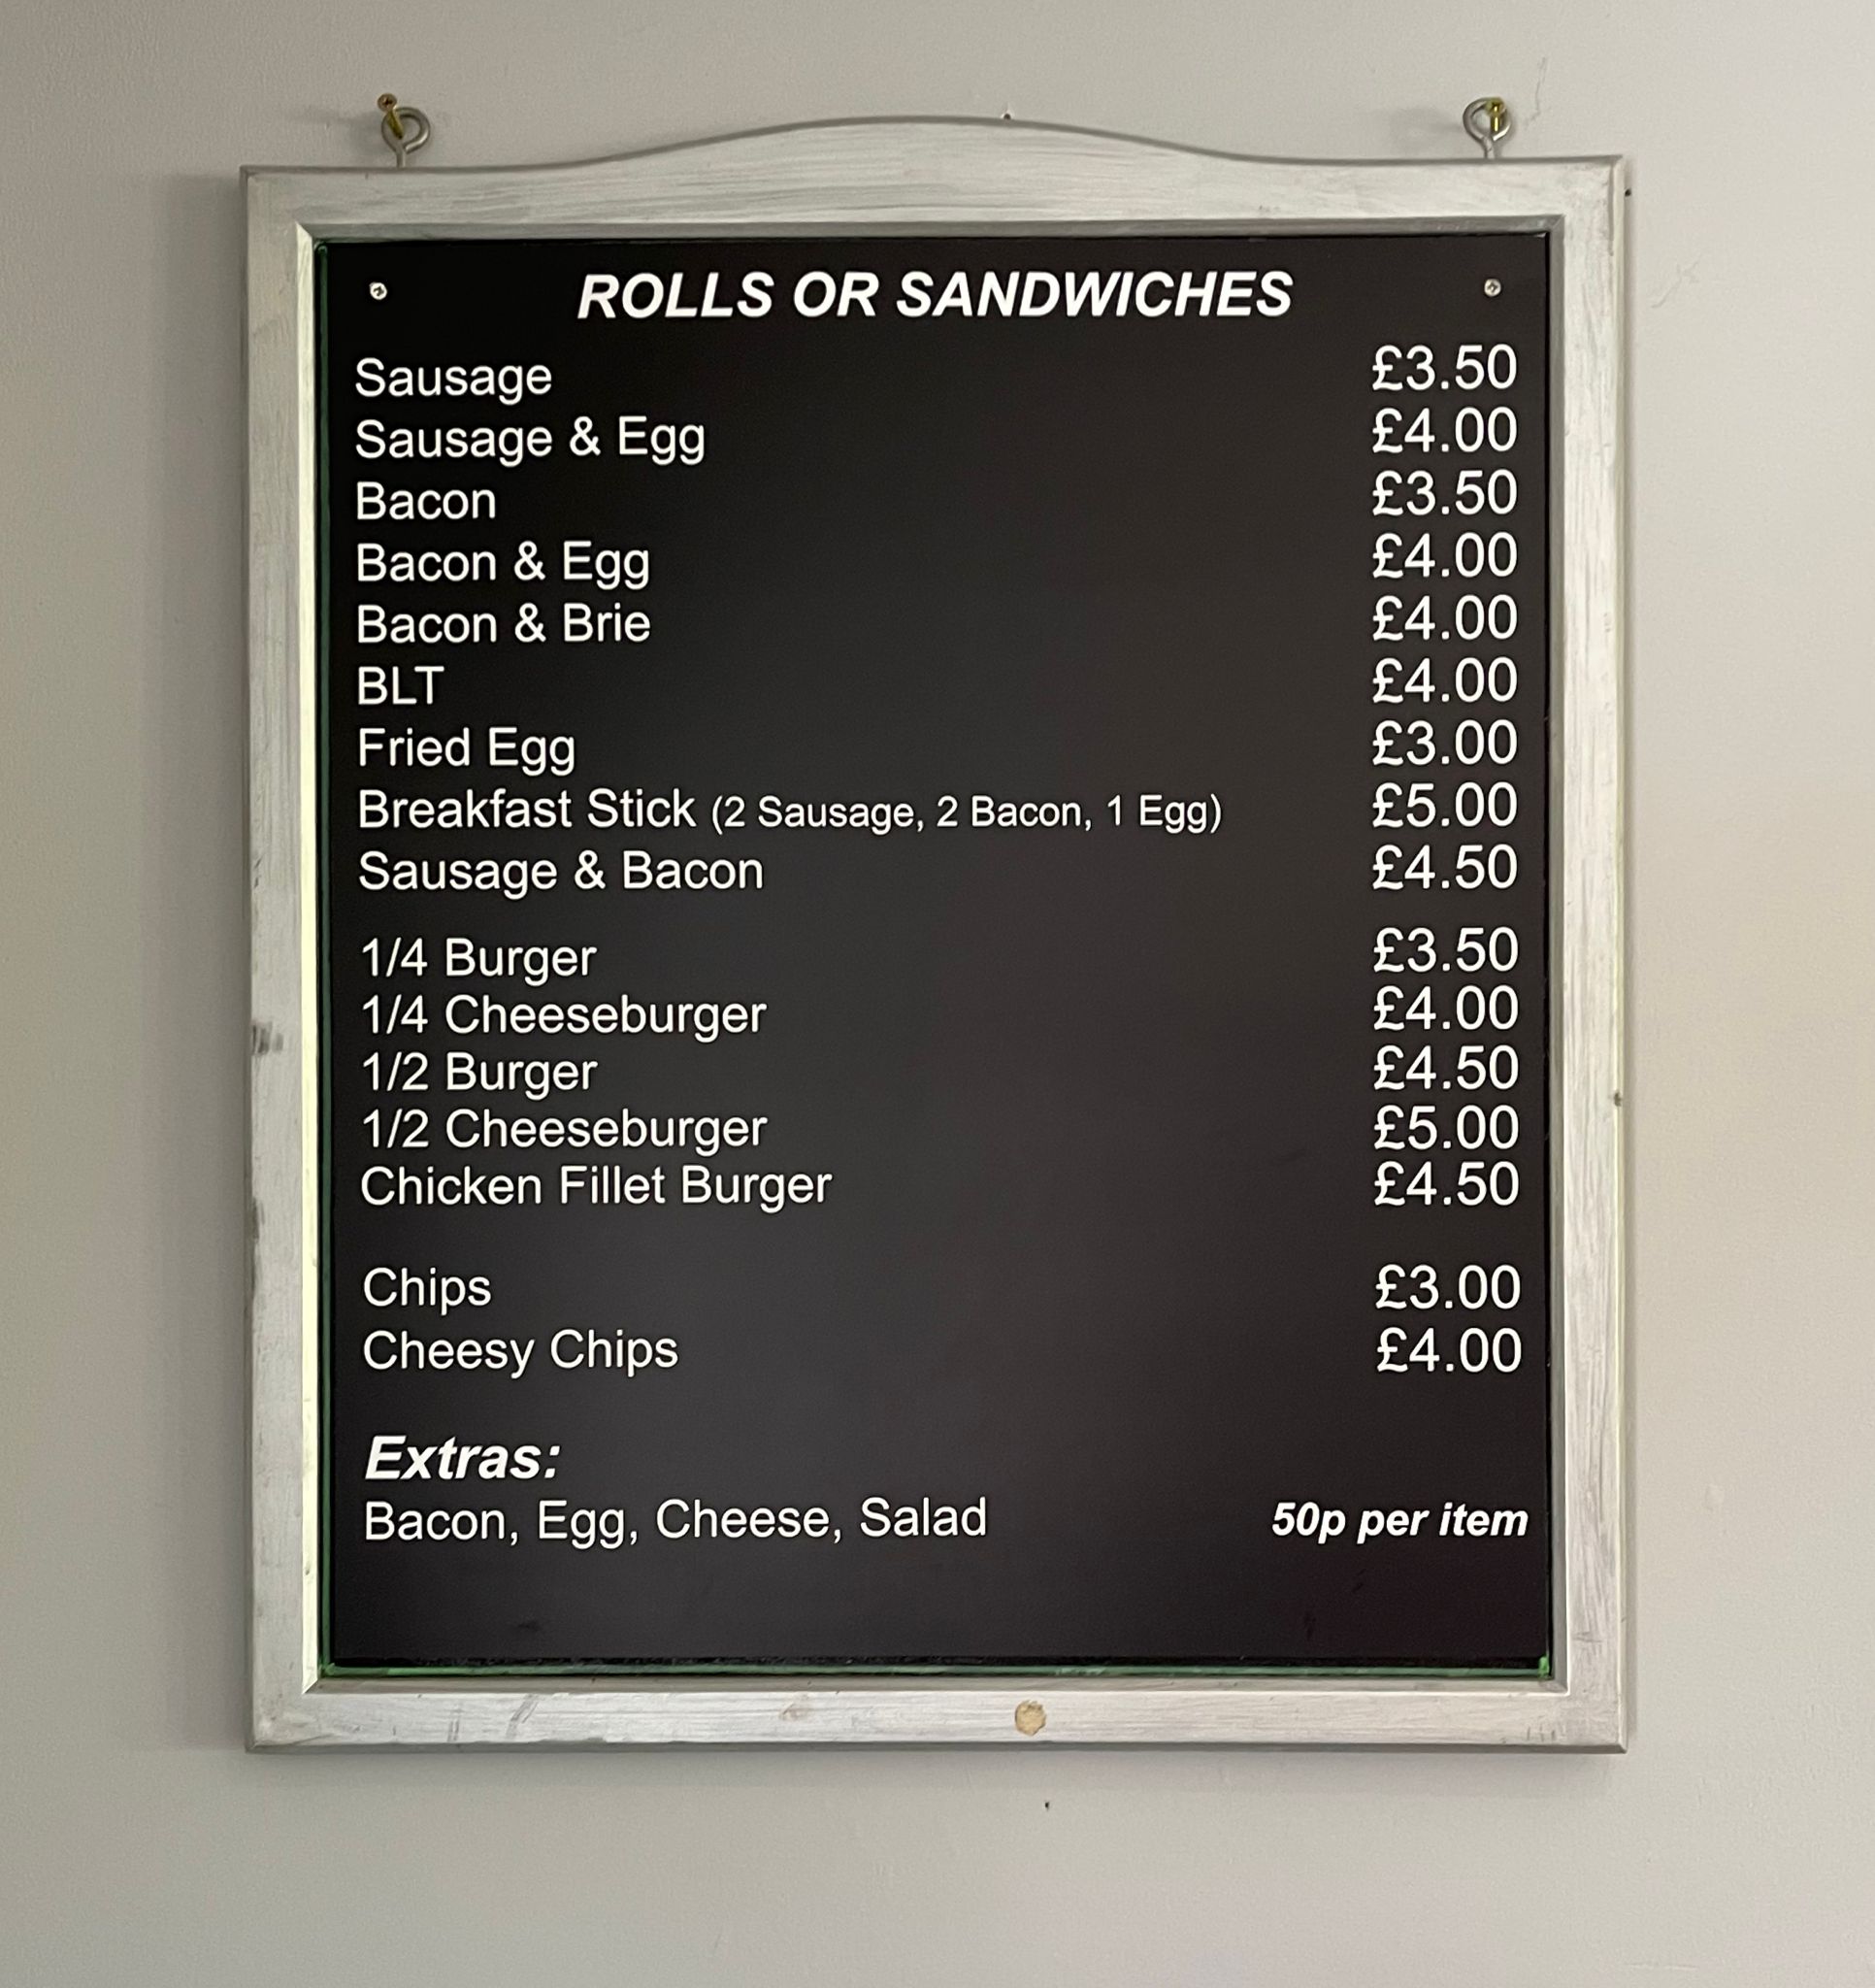 Rolls and Sandwiches